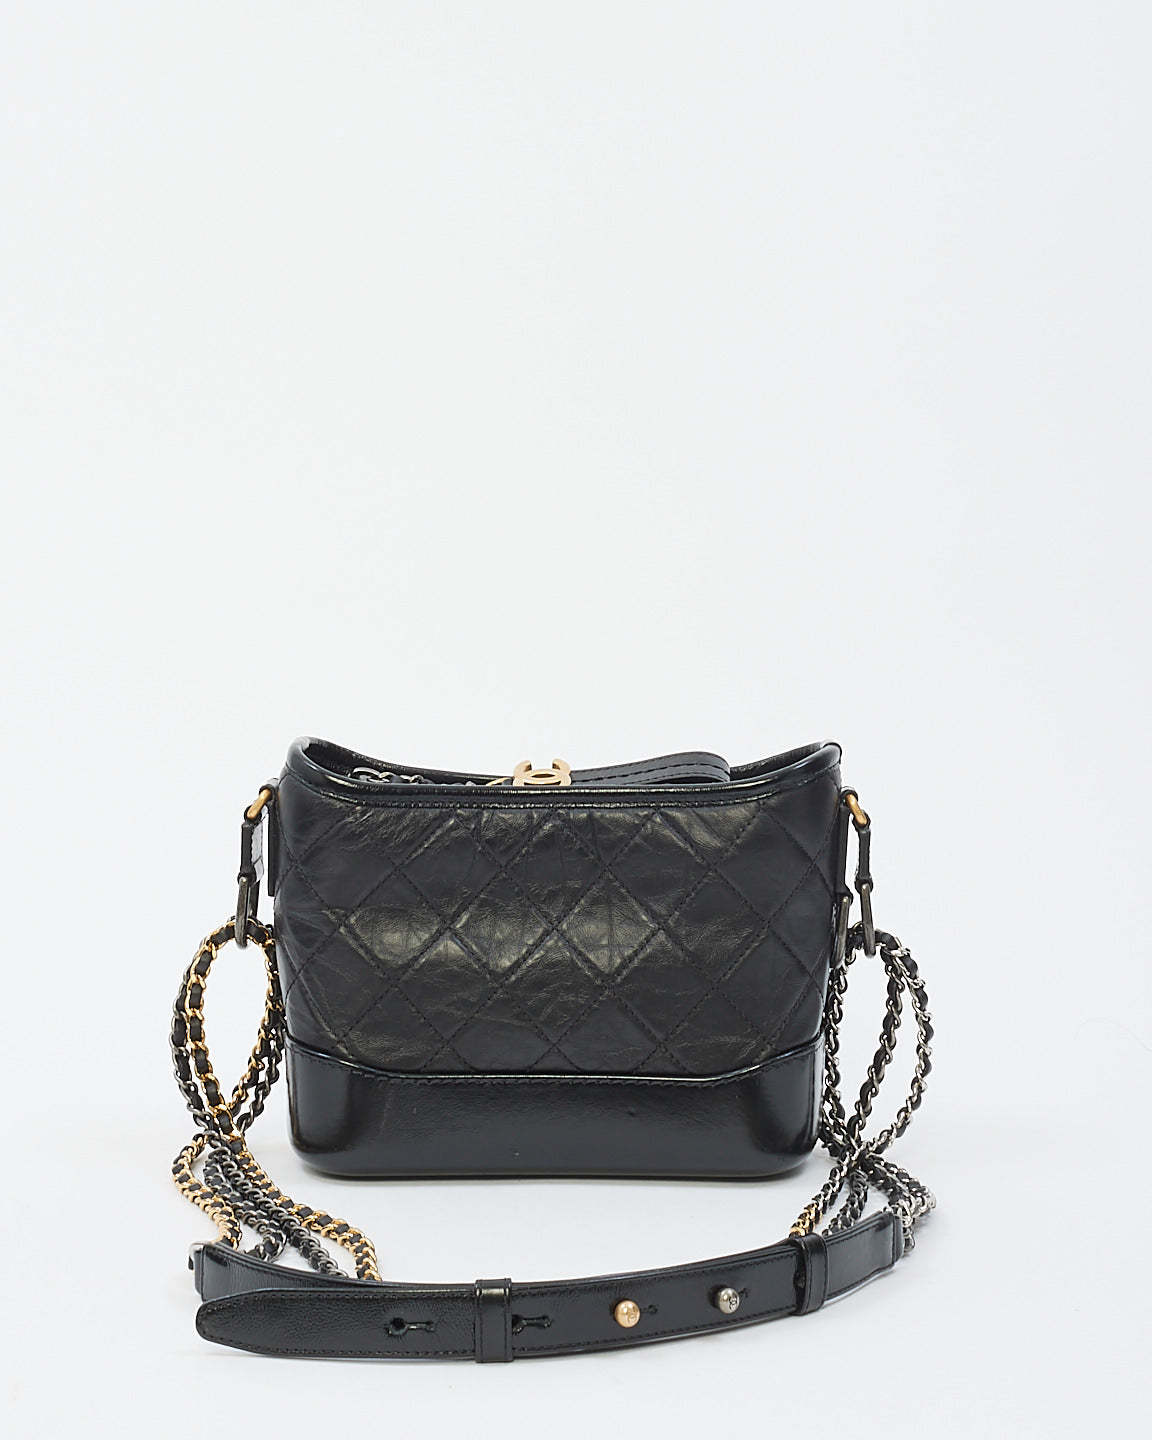 Buy Chanel Black Aged Calfskin Small Hobo Gabrielle Bag - Authenticated ...